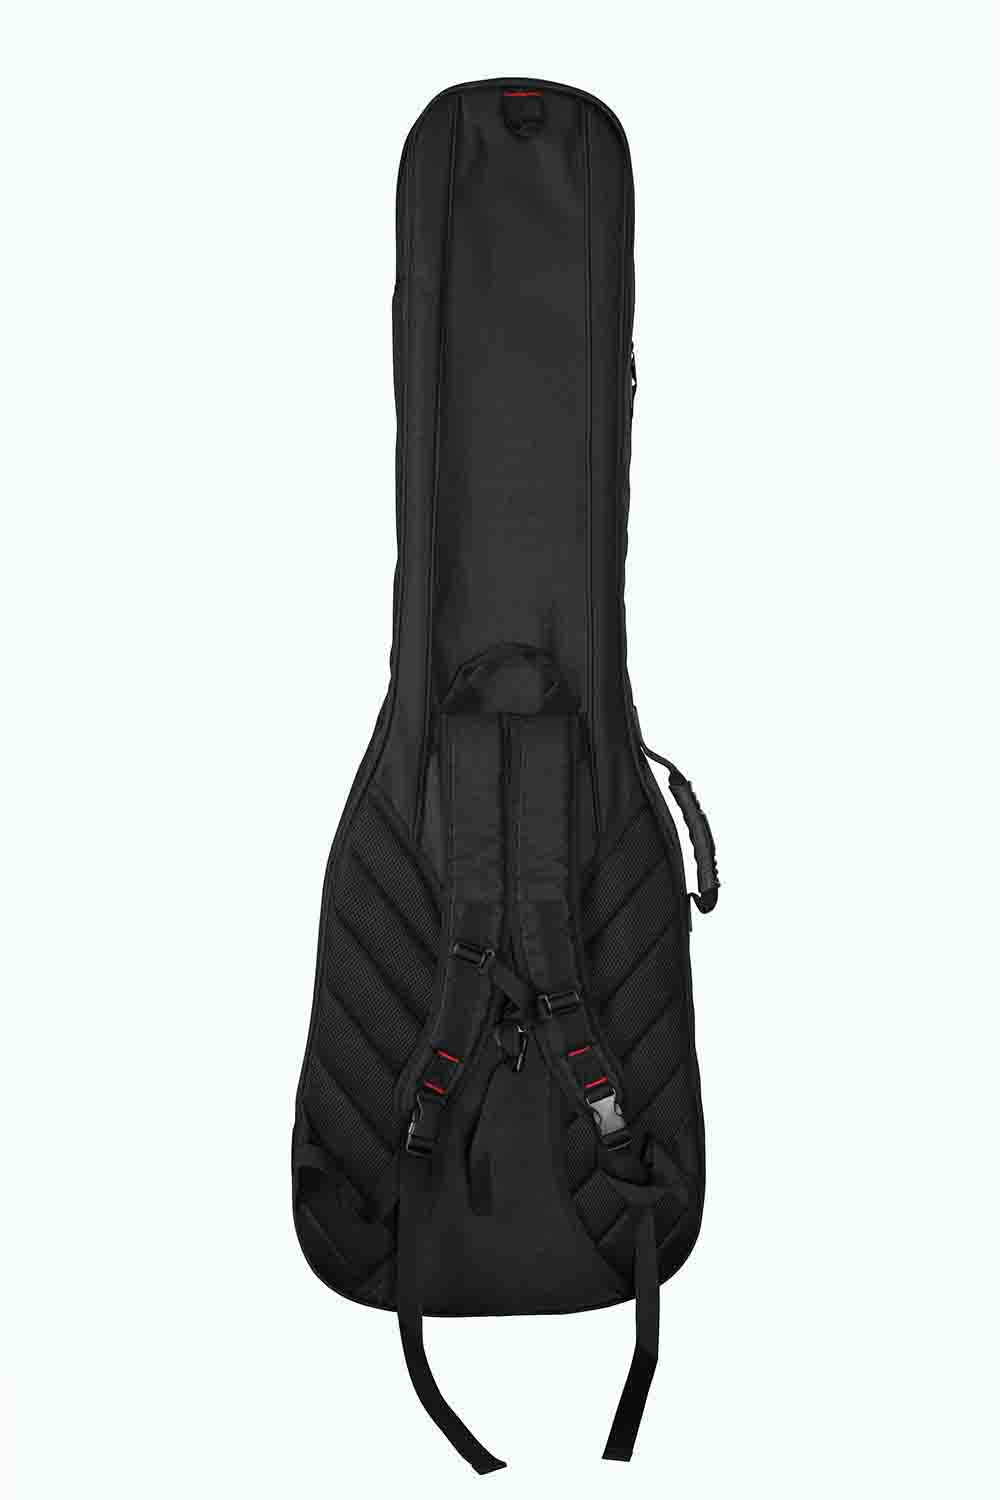 Gator Cases GB-4G-BASSX2 4G Style Gig Bag for 2 Bass Guitars with Adjustable Backpack Straps - Hollywood DJ